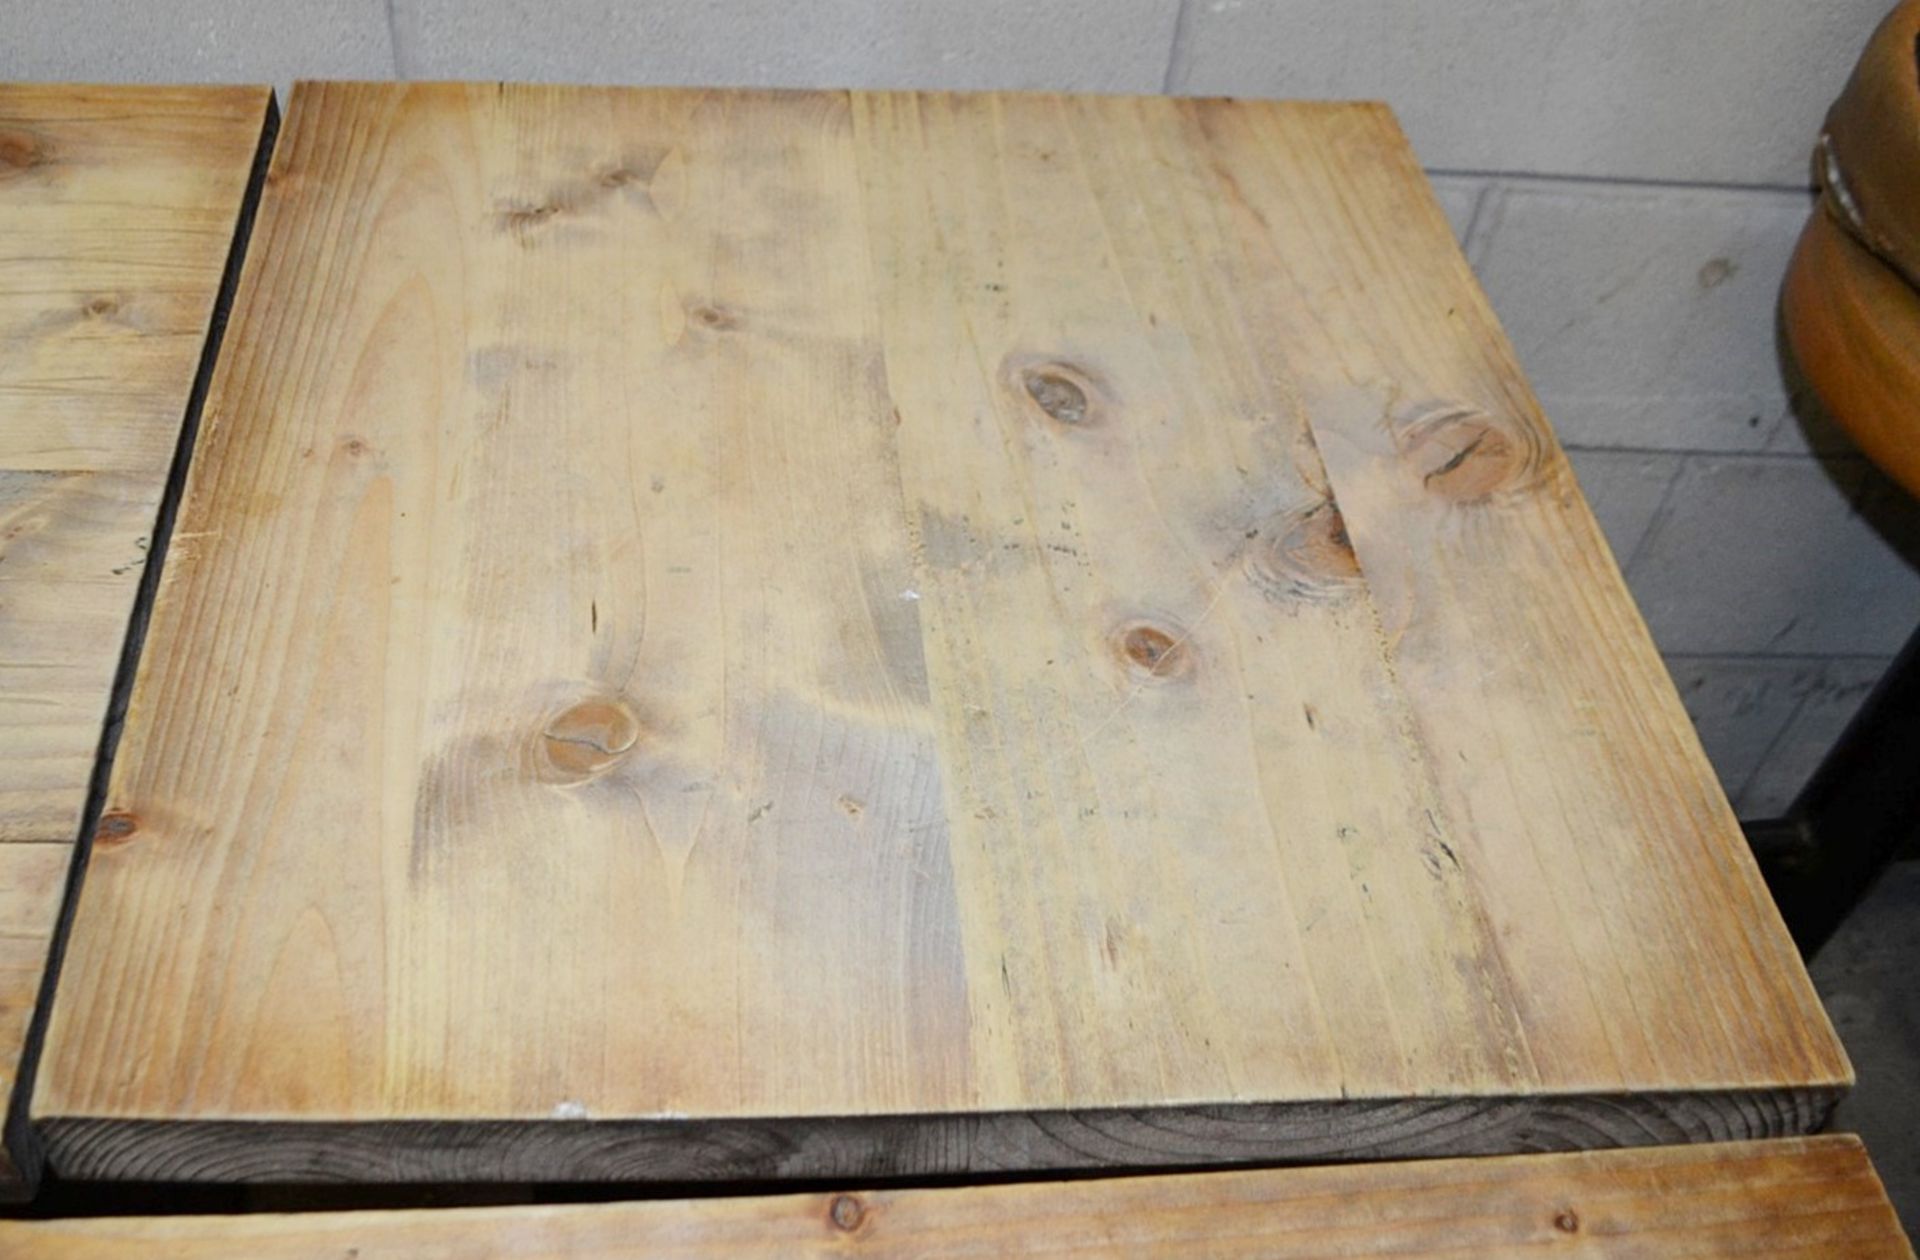 5 x Assorted Rustic Wood Topped Bisto Tables - Recently Removed From A Mexican Themed Bar & Grill - Image 2 of 7